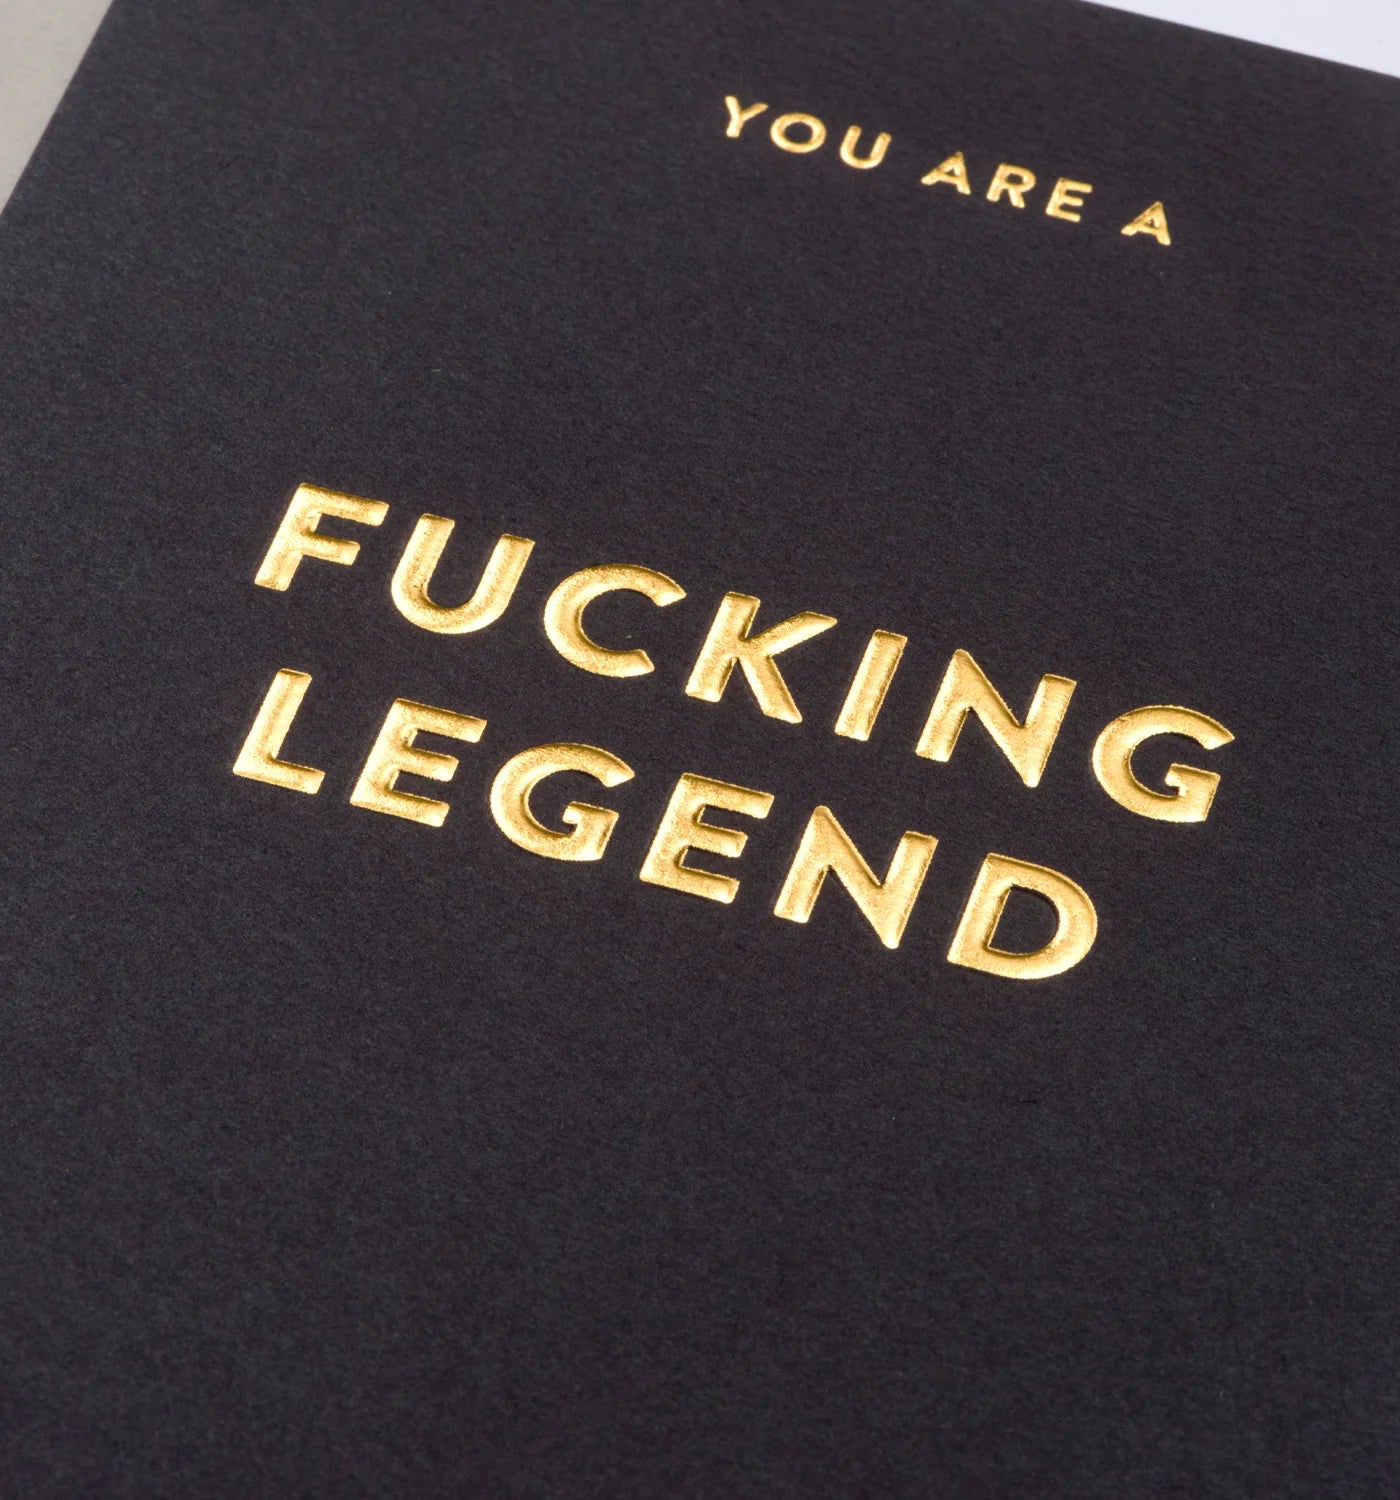 You Are A Fucking Legend Birthday Card